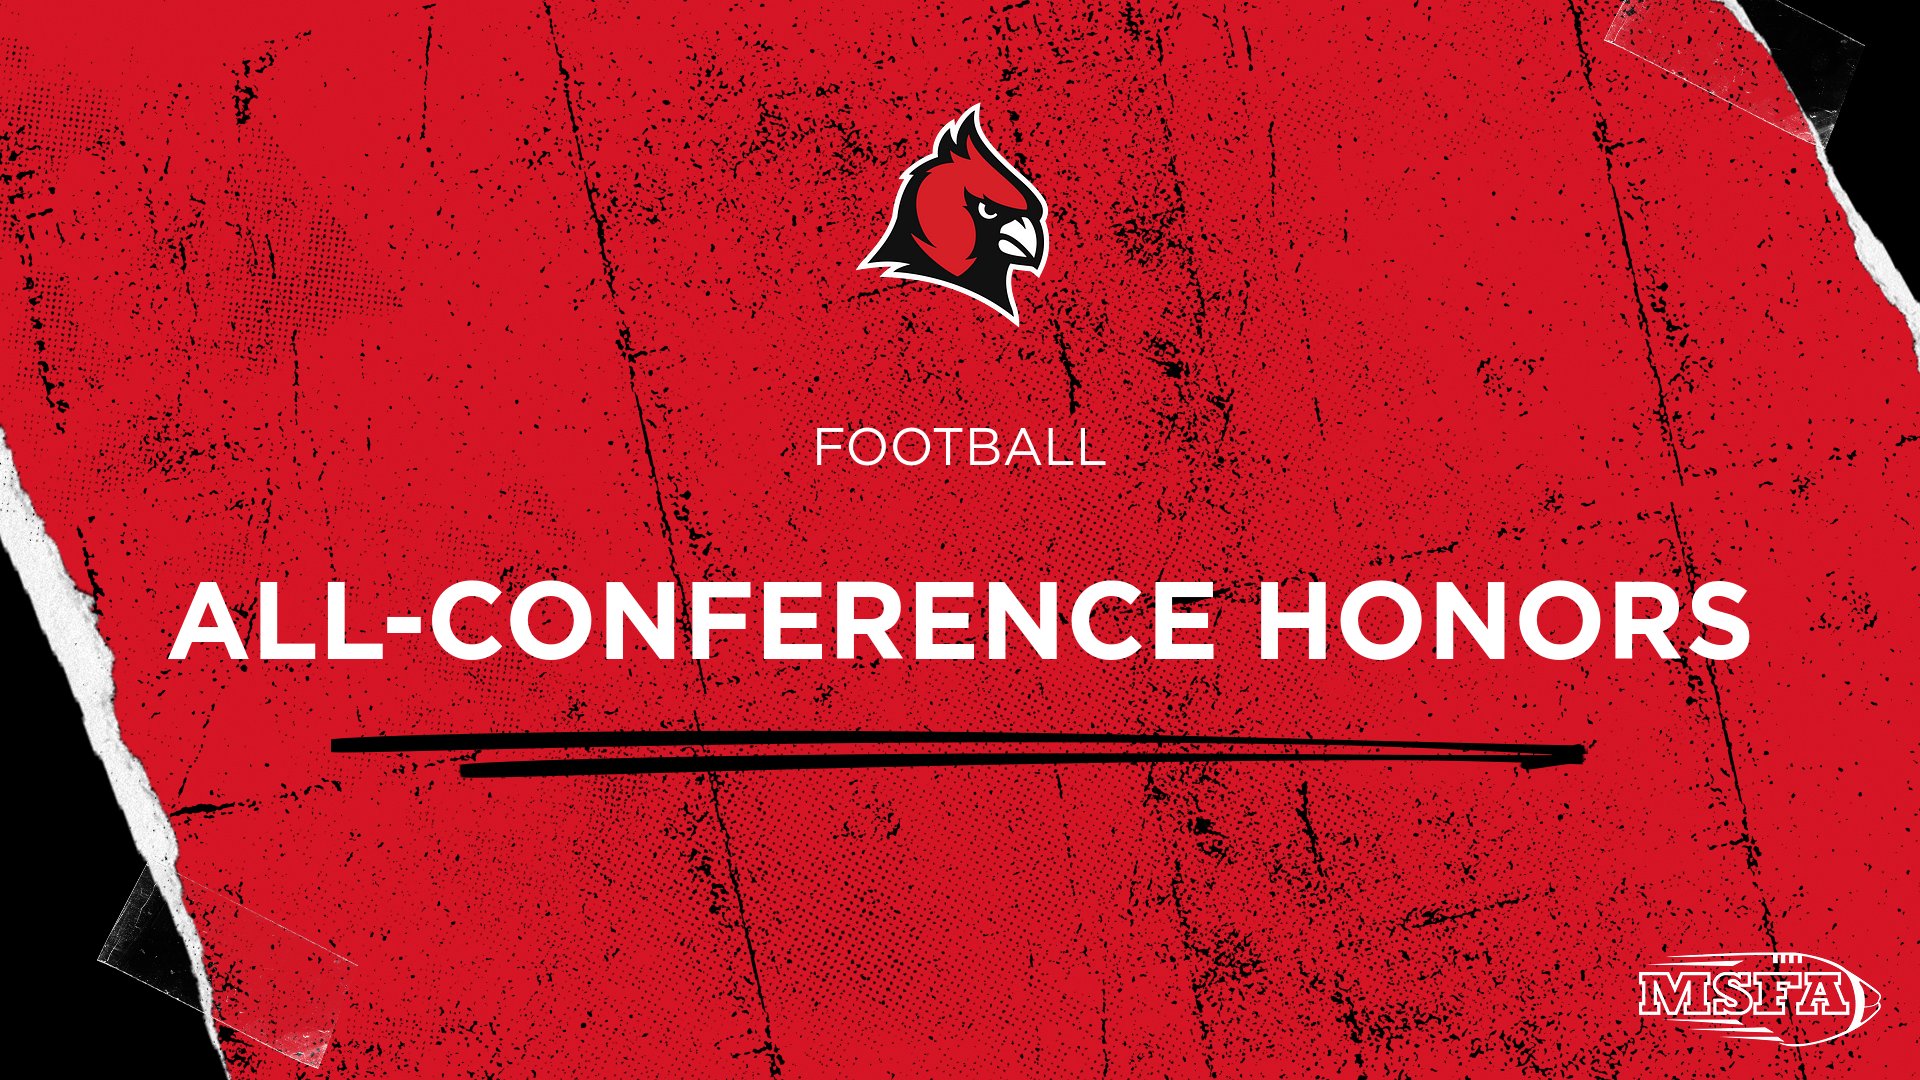 MSFA announces All-Conference teams for Football with 11 Cardinal receiving honors